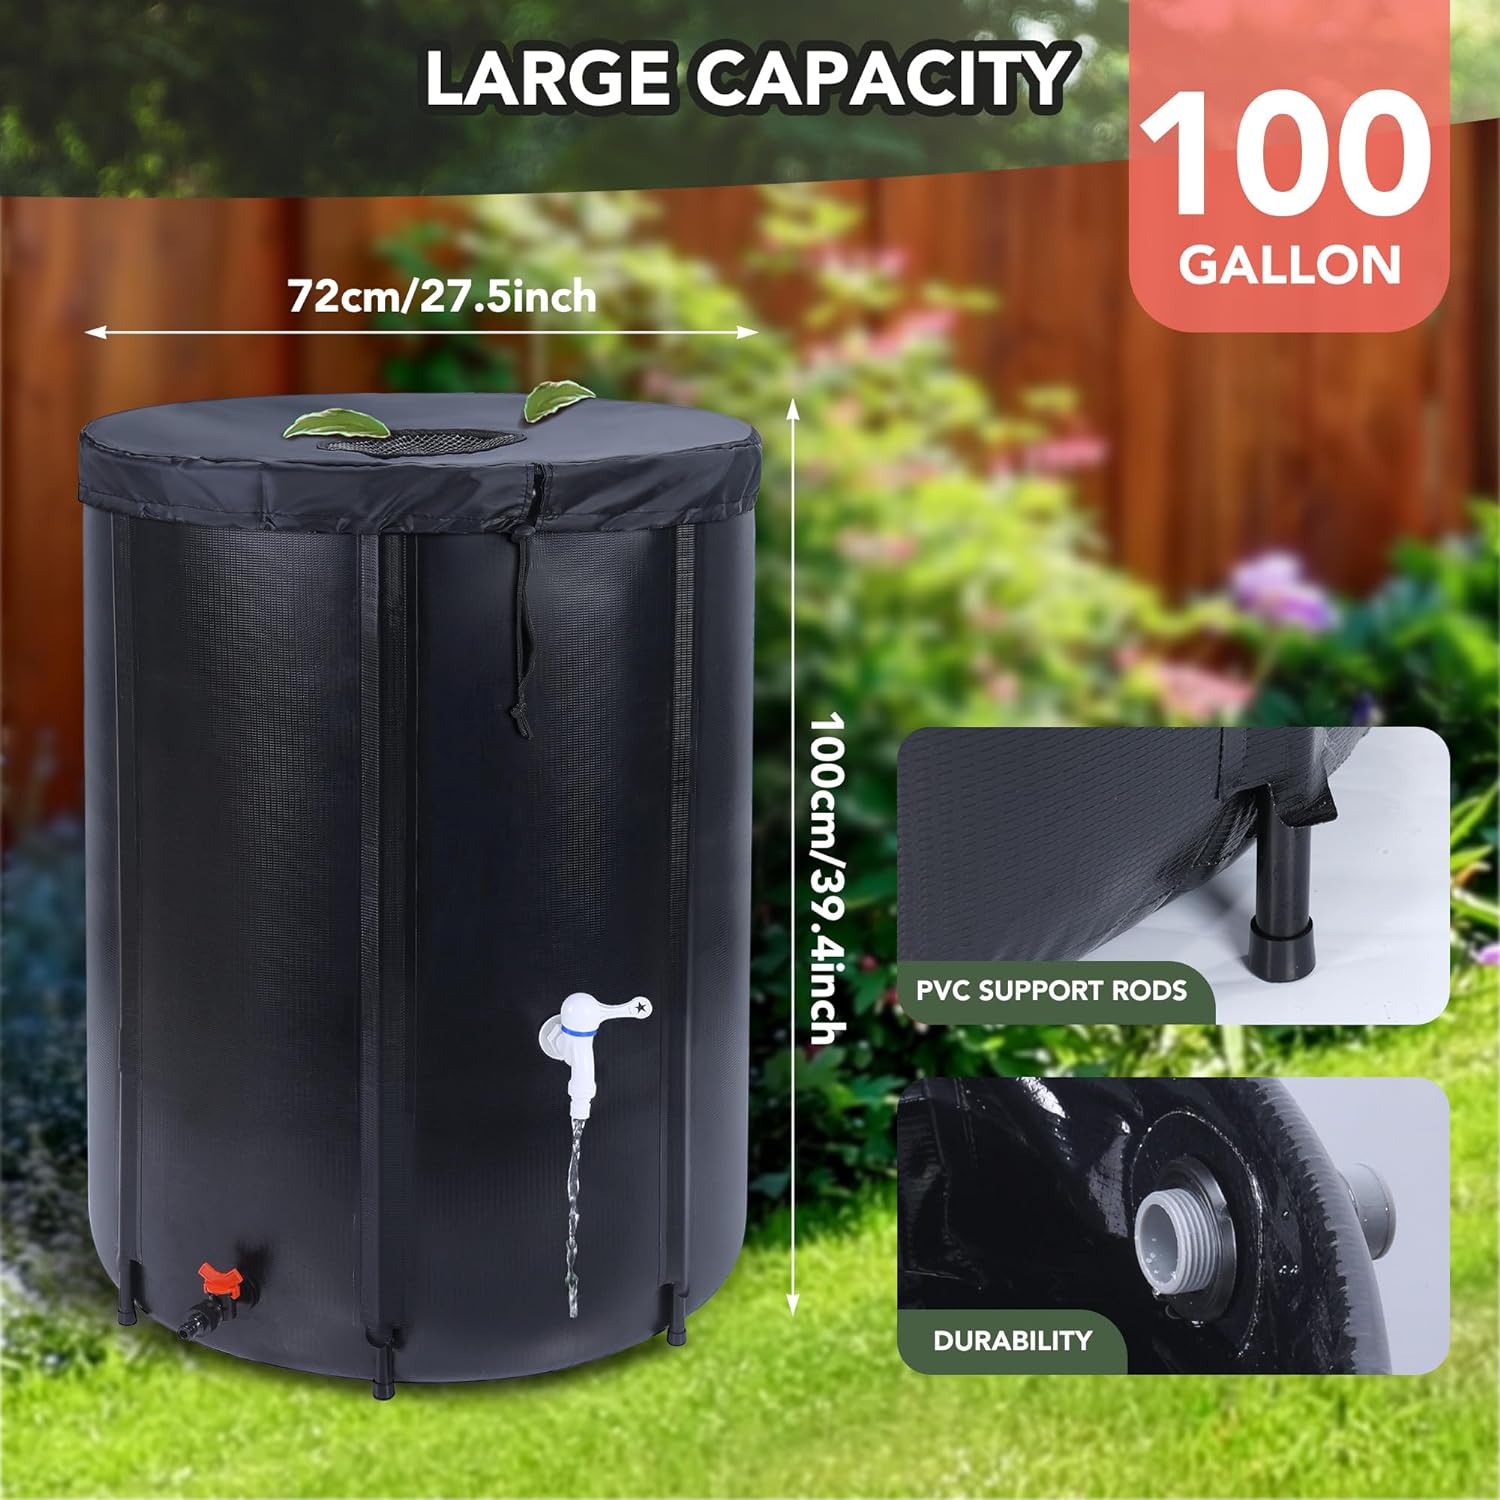 100 Gallon Rain Barrel Water Tank, Portable Water Storage Tank, Large Rain Water Collection Barrel, Collapsible Rain Water Catching System with Spigot Overflow Kit, Black